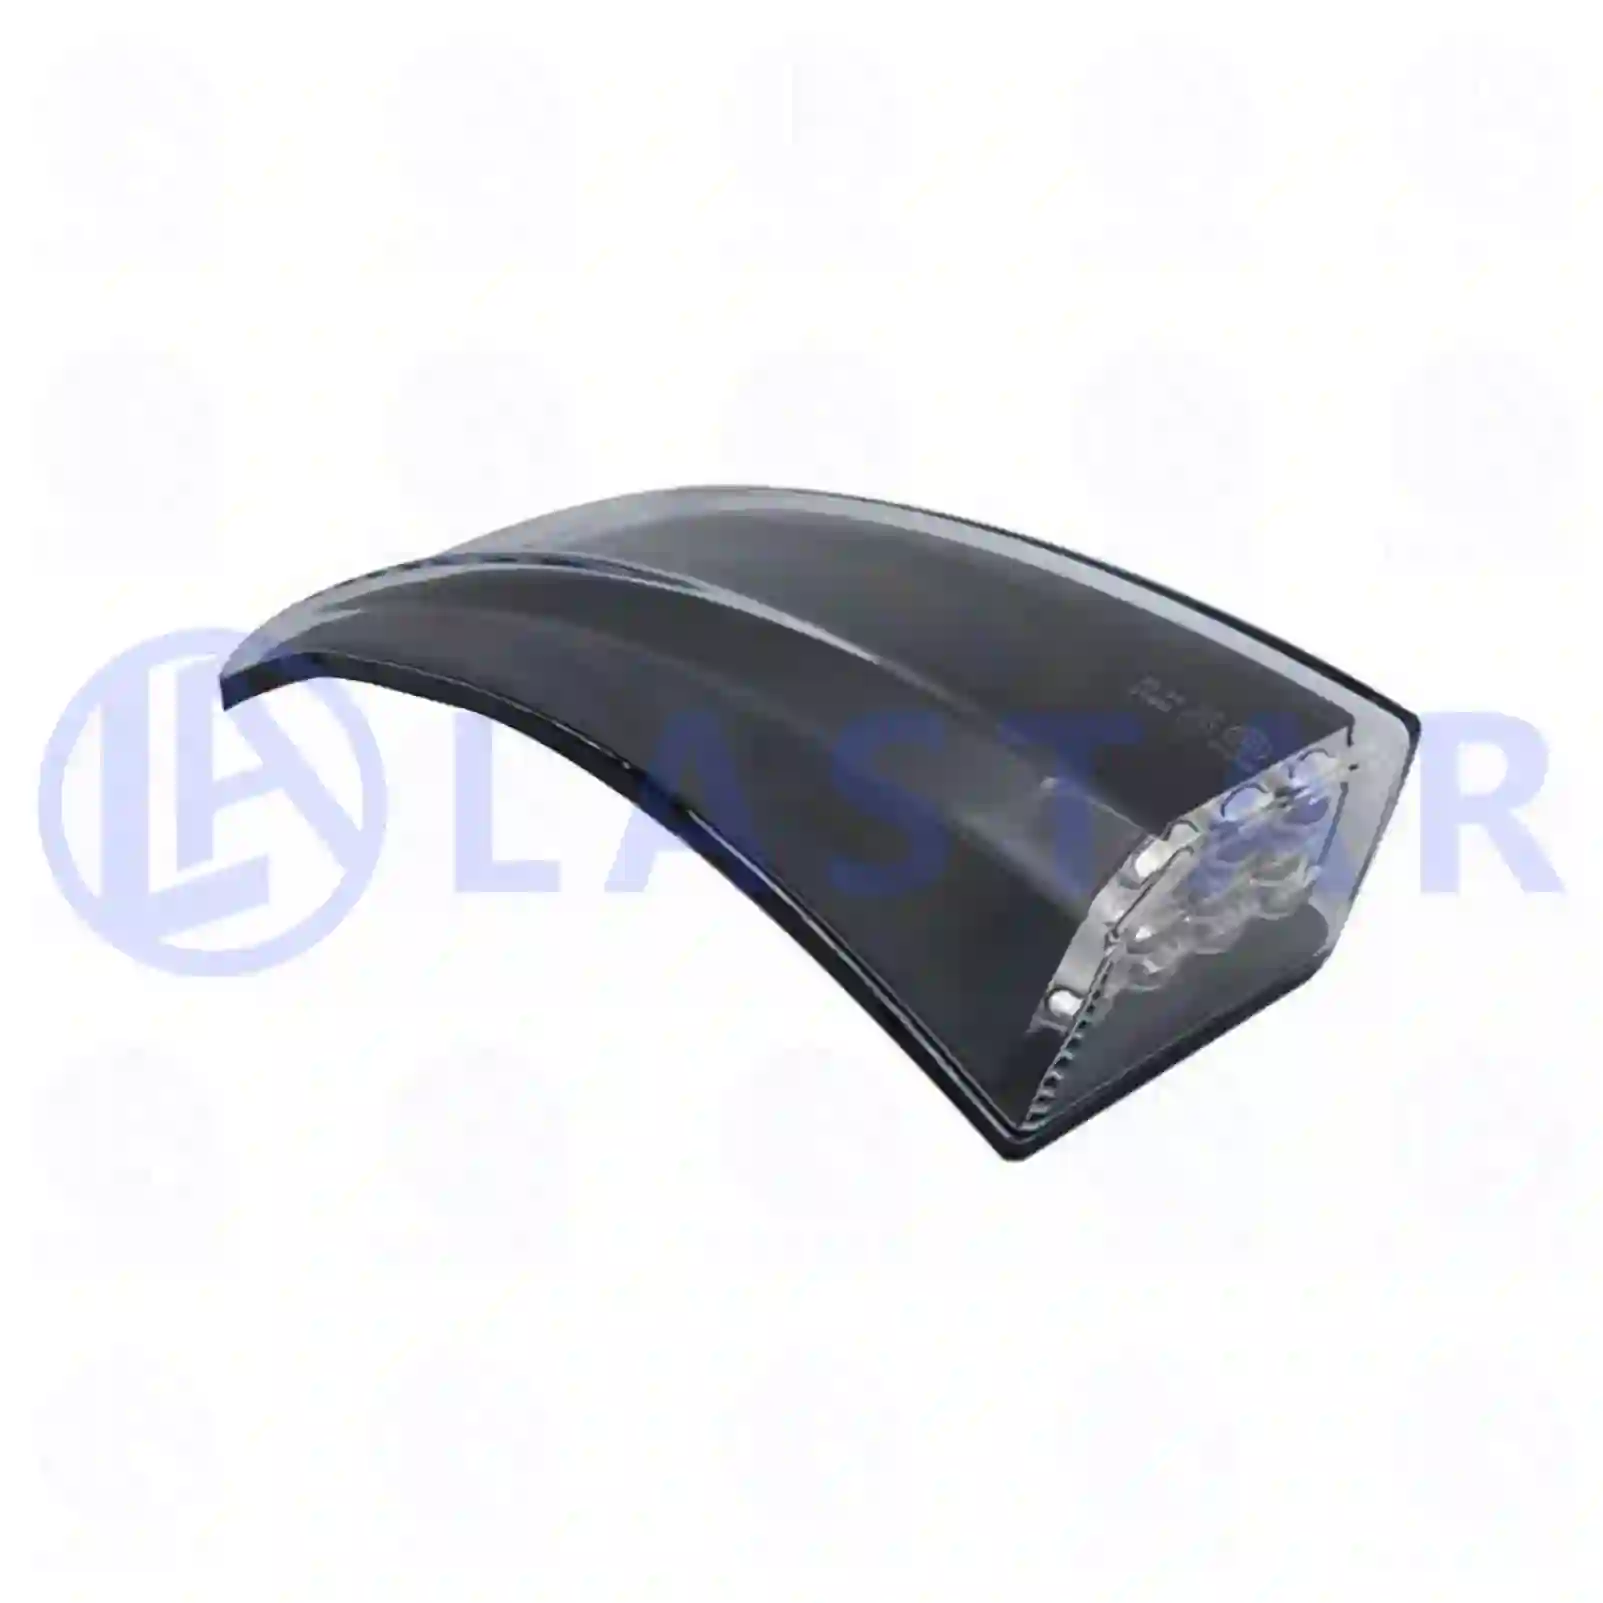 Turn signal lamp, lateral, right, black, 77711097, 21346522 ||  77711097 Lastar Spare Part | Truck Spare Parts, Auotomotive Spare Parts Turn signal lamp, lateral, right, black, 77711097, 21346522 ||  77711097 Lastar Spare Part | Truck Spare Parts, Auotomotive Spare Parts